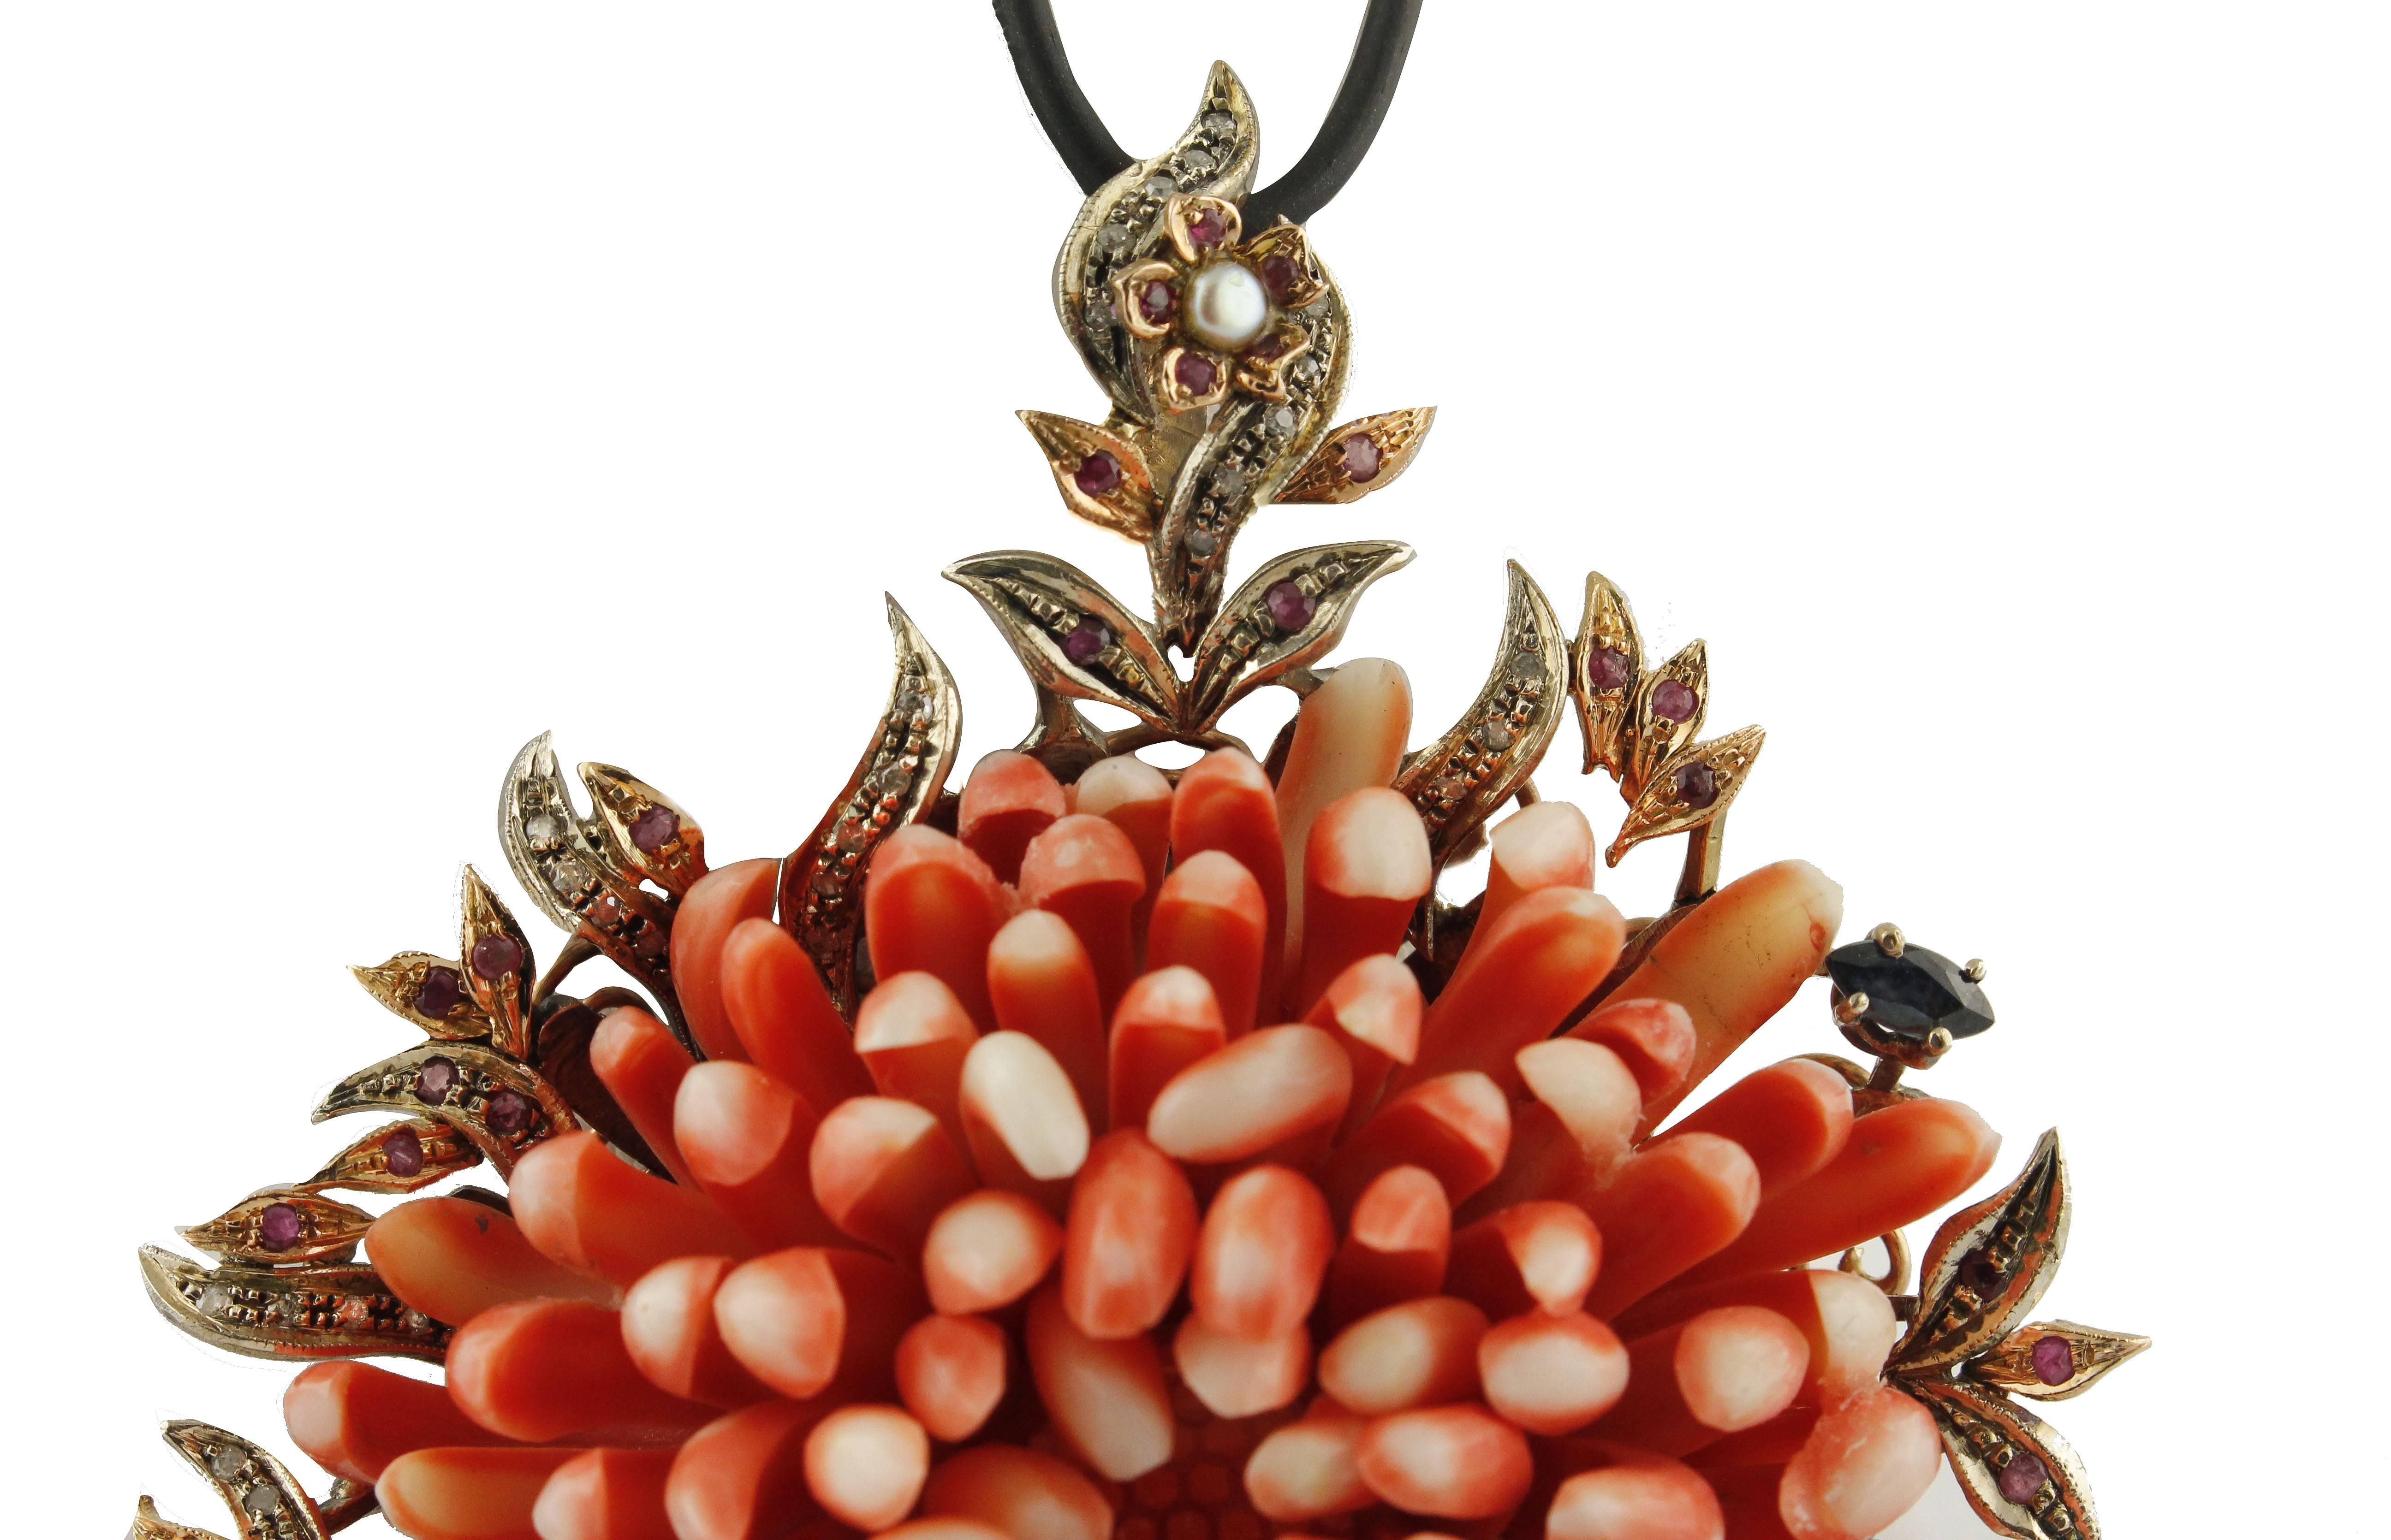 Round Cut Orange/Red Corals, Diamonds, Rubies, Sapphires, Rose Gold/Silver Pendant Necklace